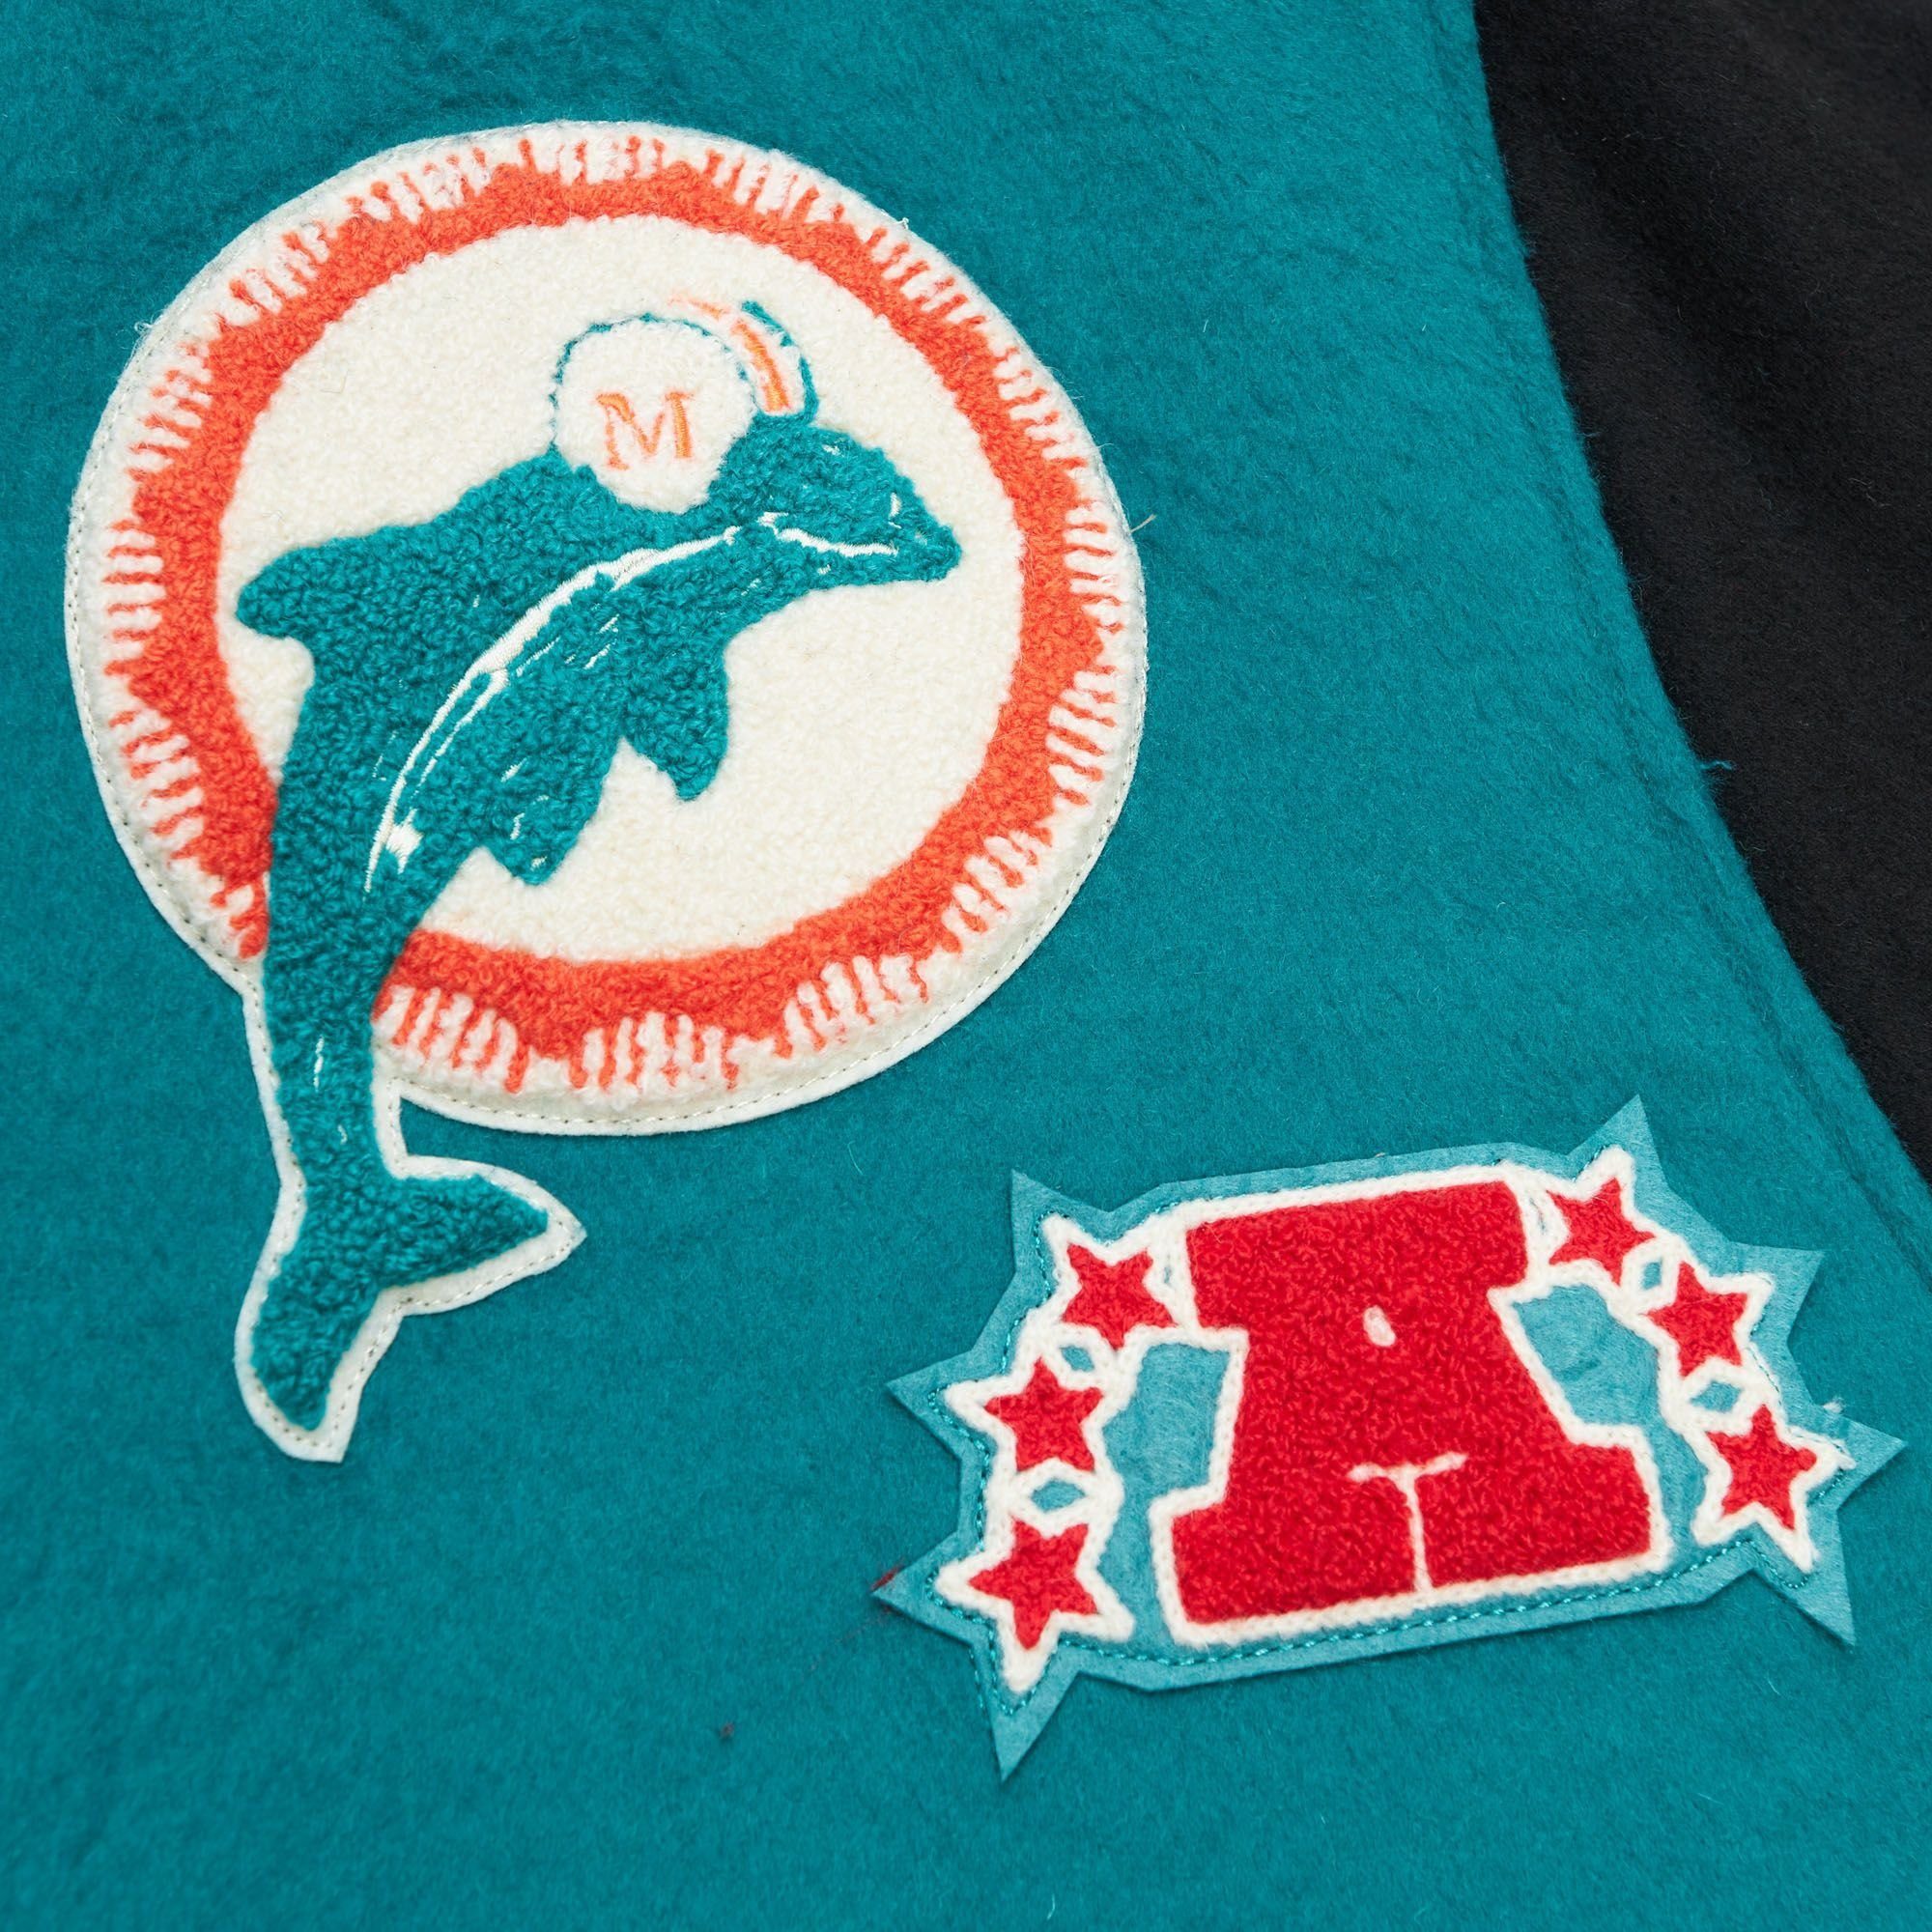 Mitchell & Ness Collegejacke Miami Legacy Wool Varsity NFL Dolphins